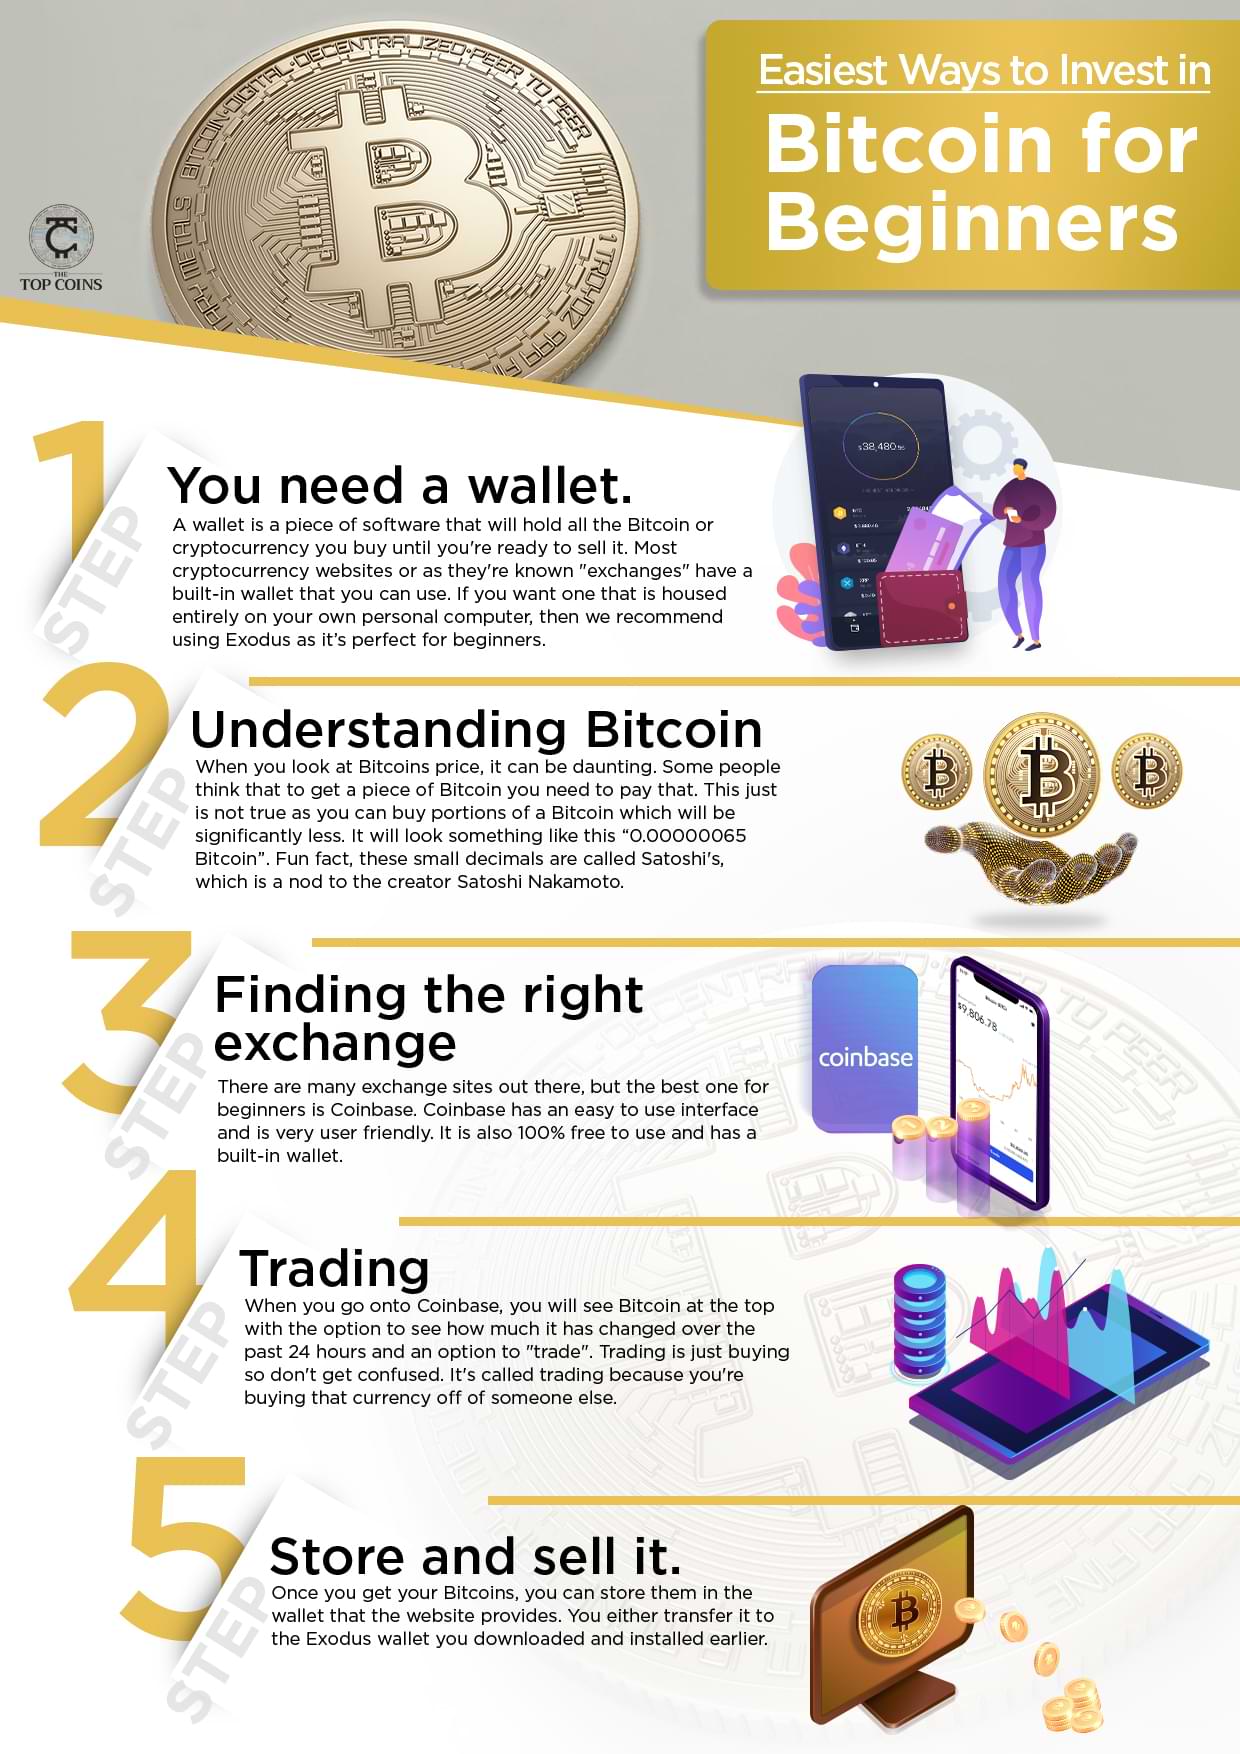 Easiest Ways to Invest in Bitcoin for Beginners Infographic